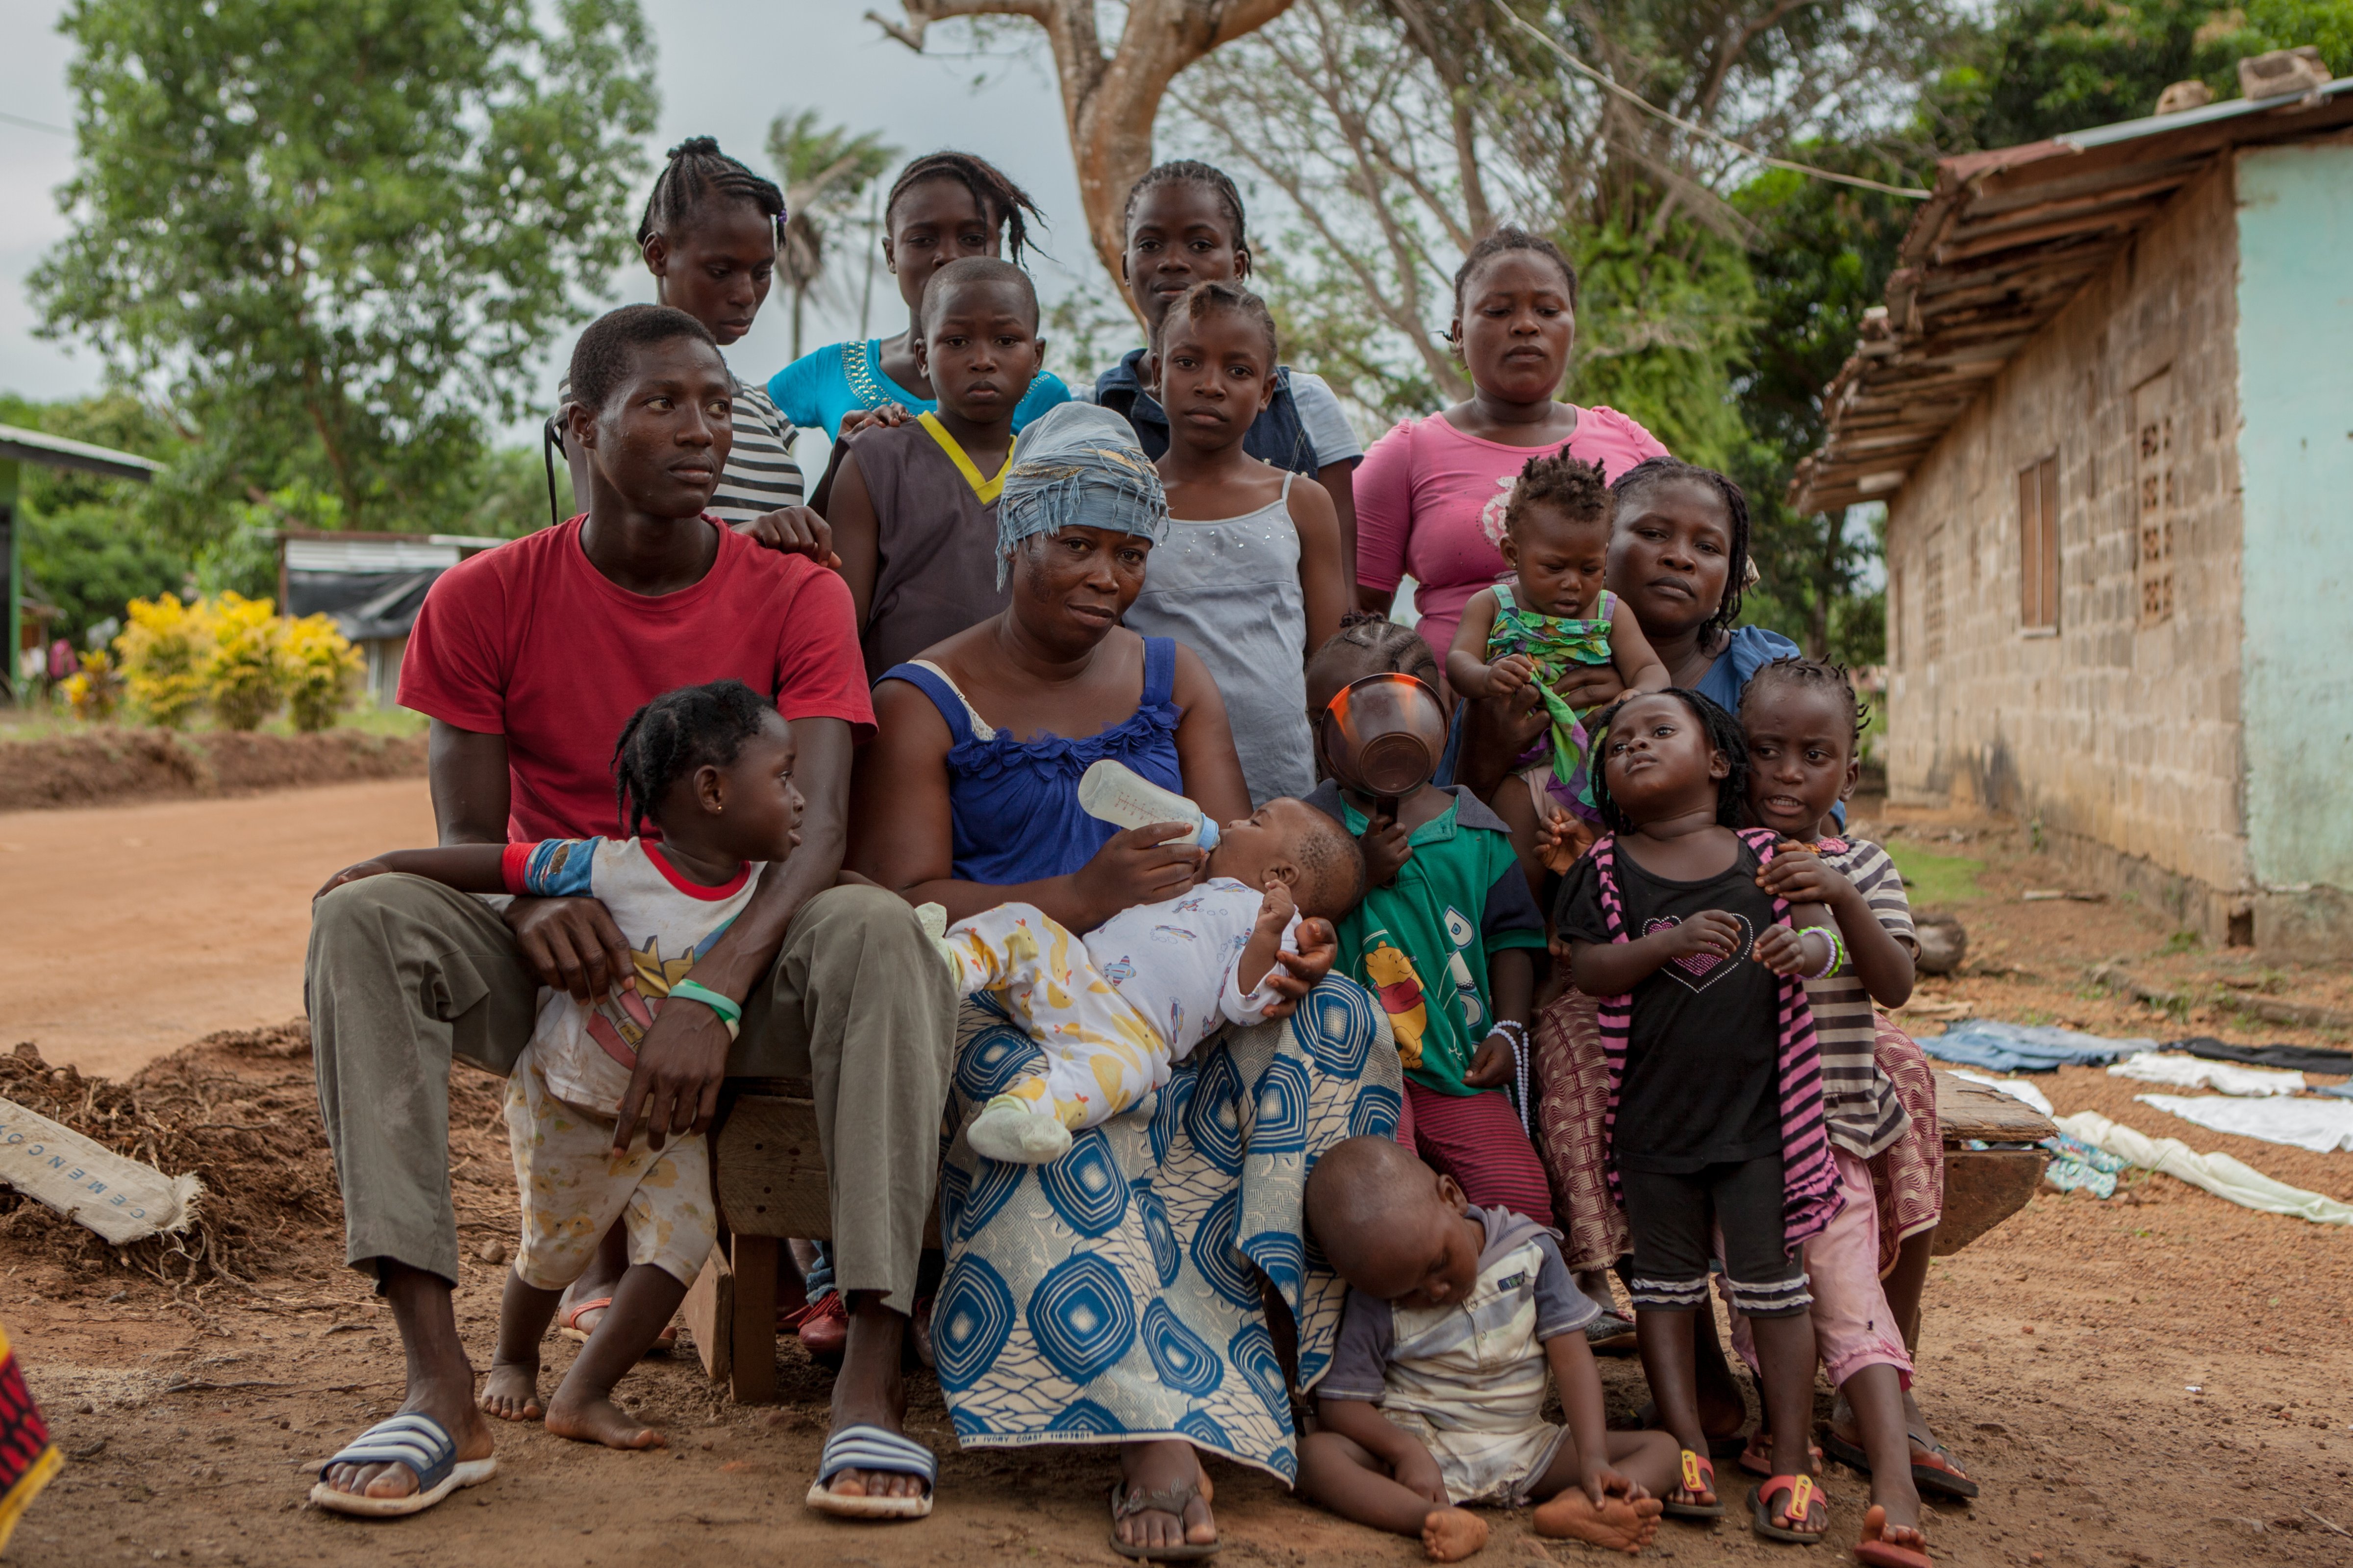 Dudu Kromah's husband died from Ebola. She is looking after ten children, many of them orphans including a 3-month-old baby. She has no income. (Carly Learson—Carly Learson / UNDP)